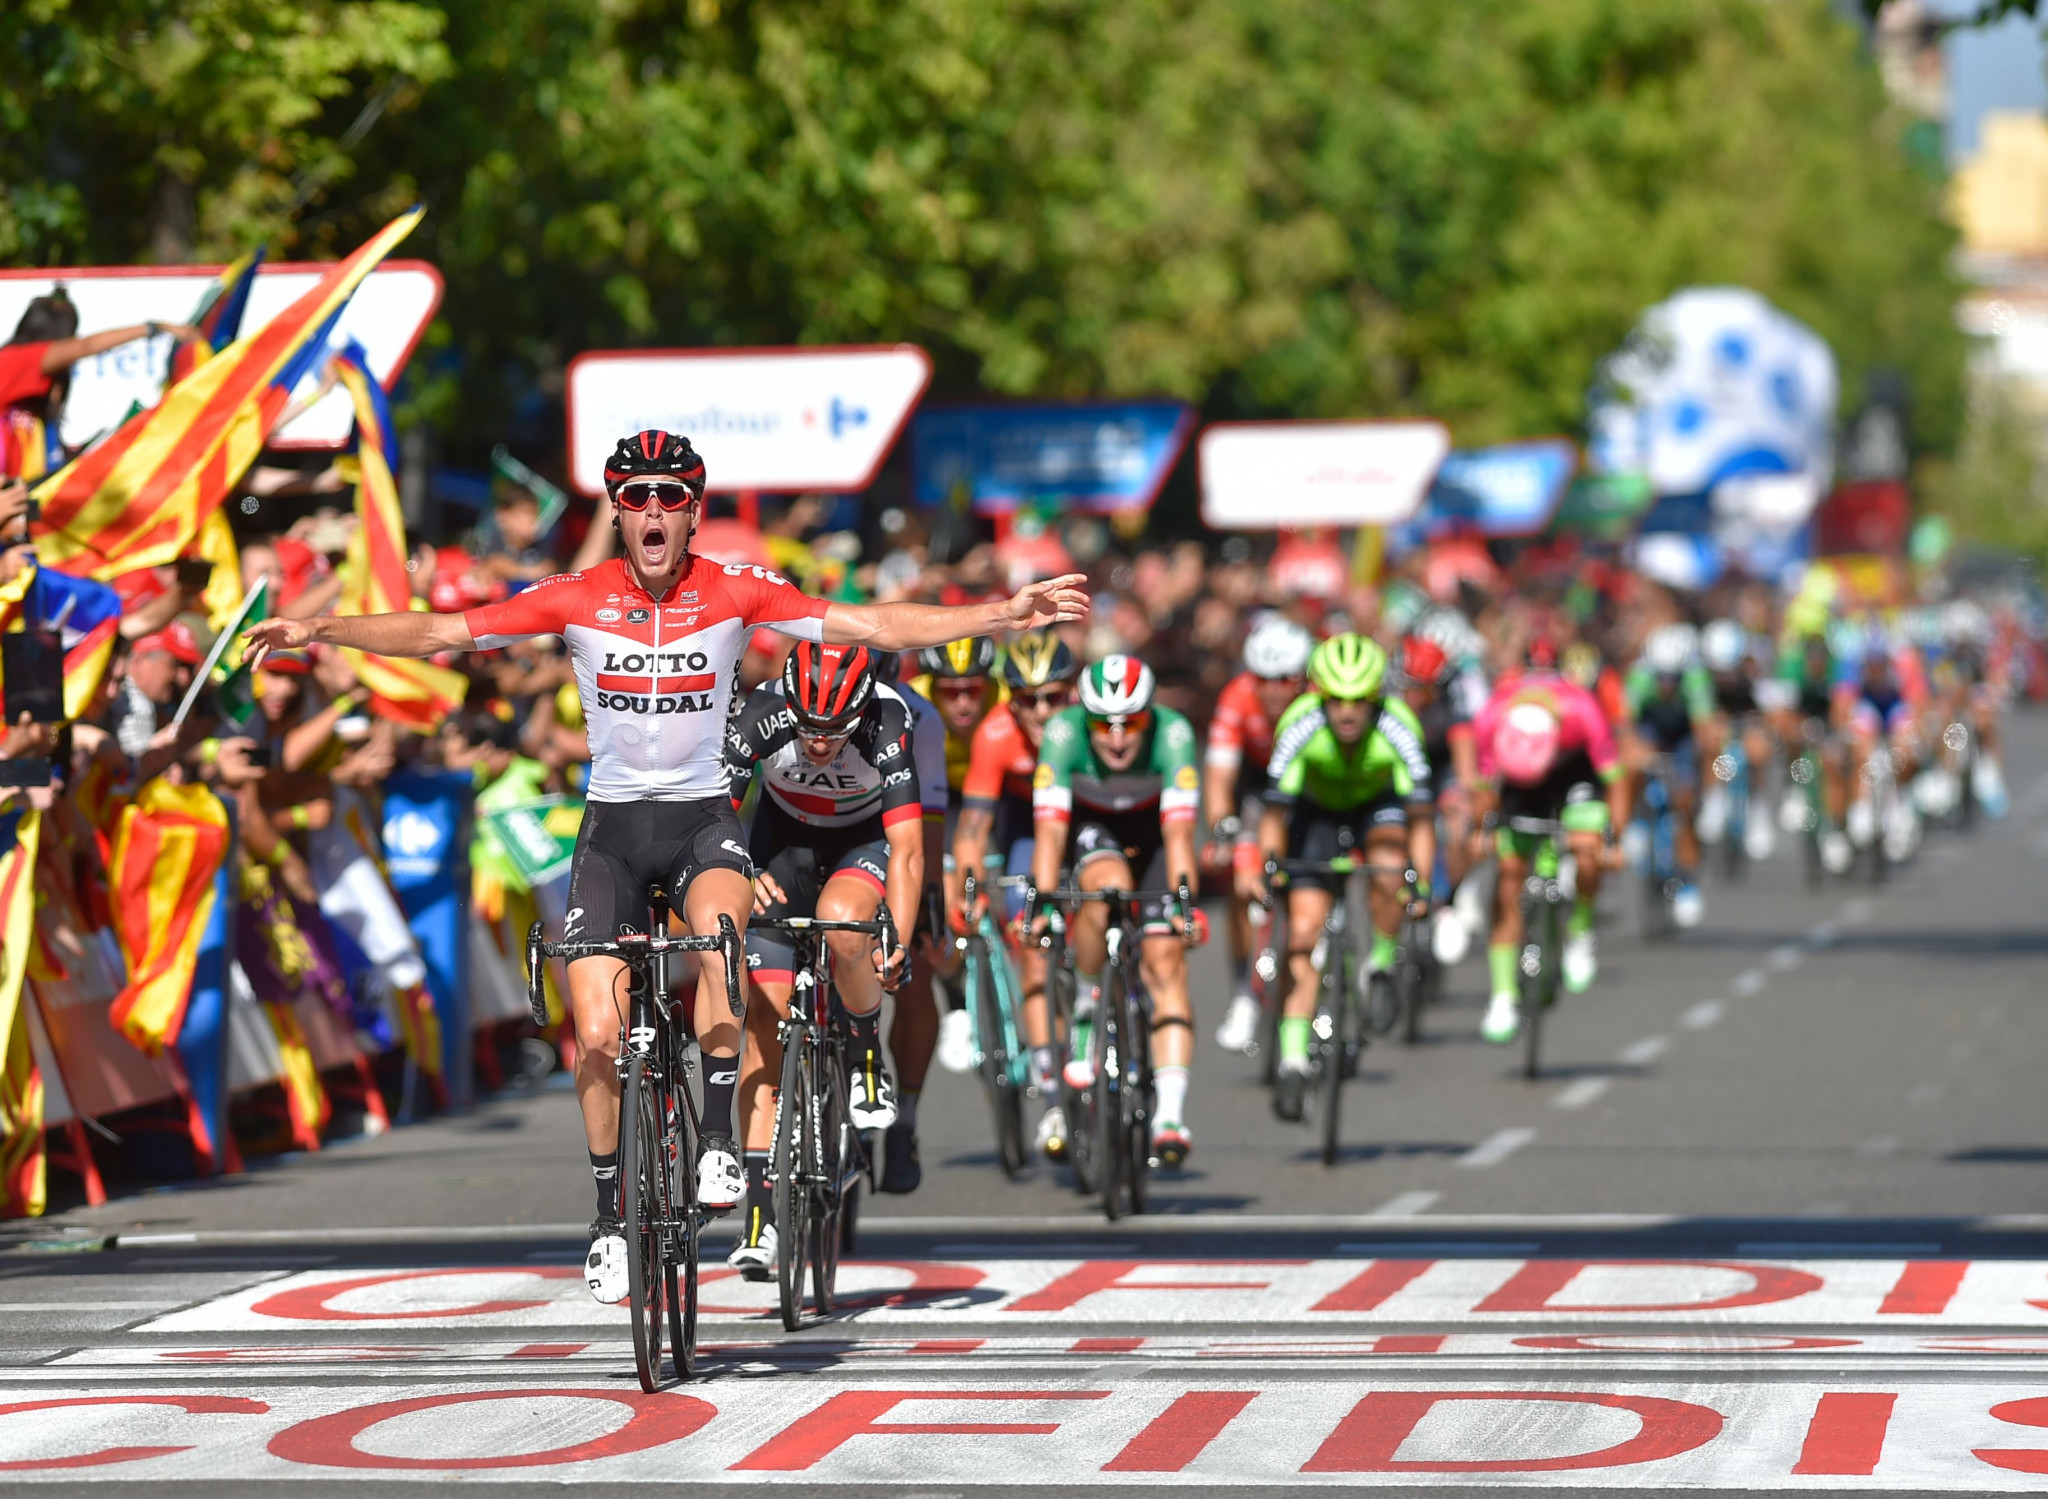 Wallays holds off sprinters to win stage 18 of Vuelta a España